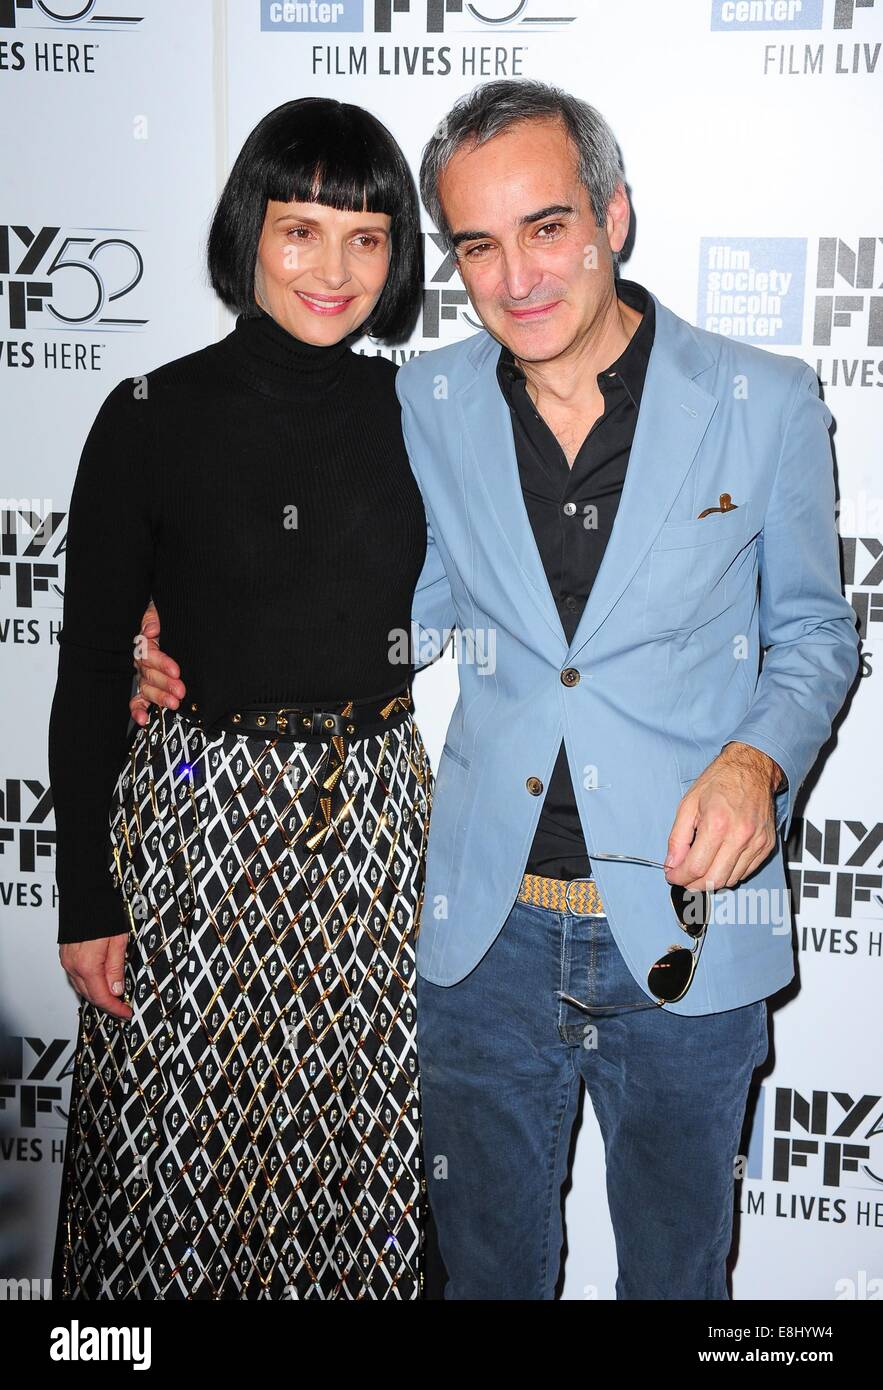 New York, USA. 8th October, 2014. Juliette Binoche, Olivier Assayas at arrivals for CLOUDS OF SILS MARIA Premiere at the 52nd New York Film Festival, Alice Tully Hall at Lincoln Center, new, NY October 8, 2014. Photo By: Gregorio T. Binuya/Everett Collection/ Alamy Live News Stock Photo